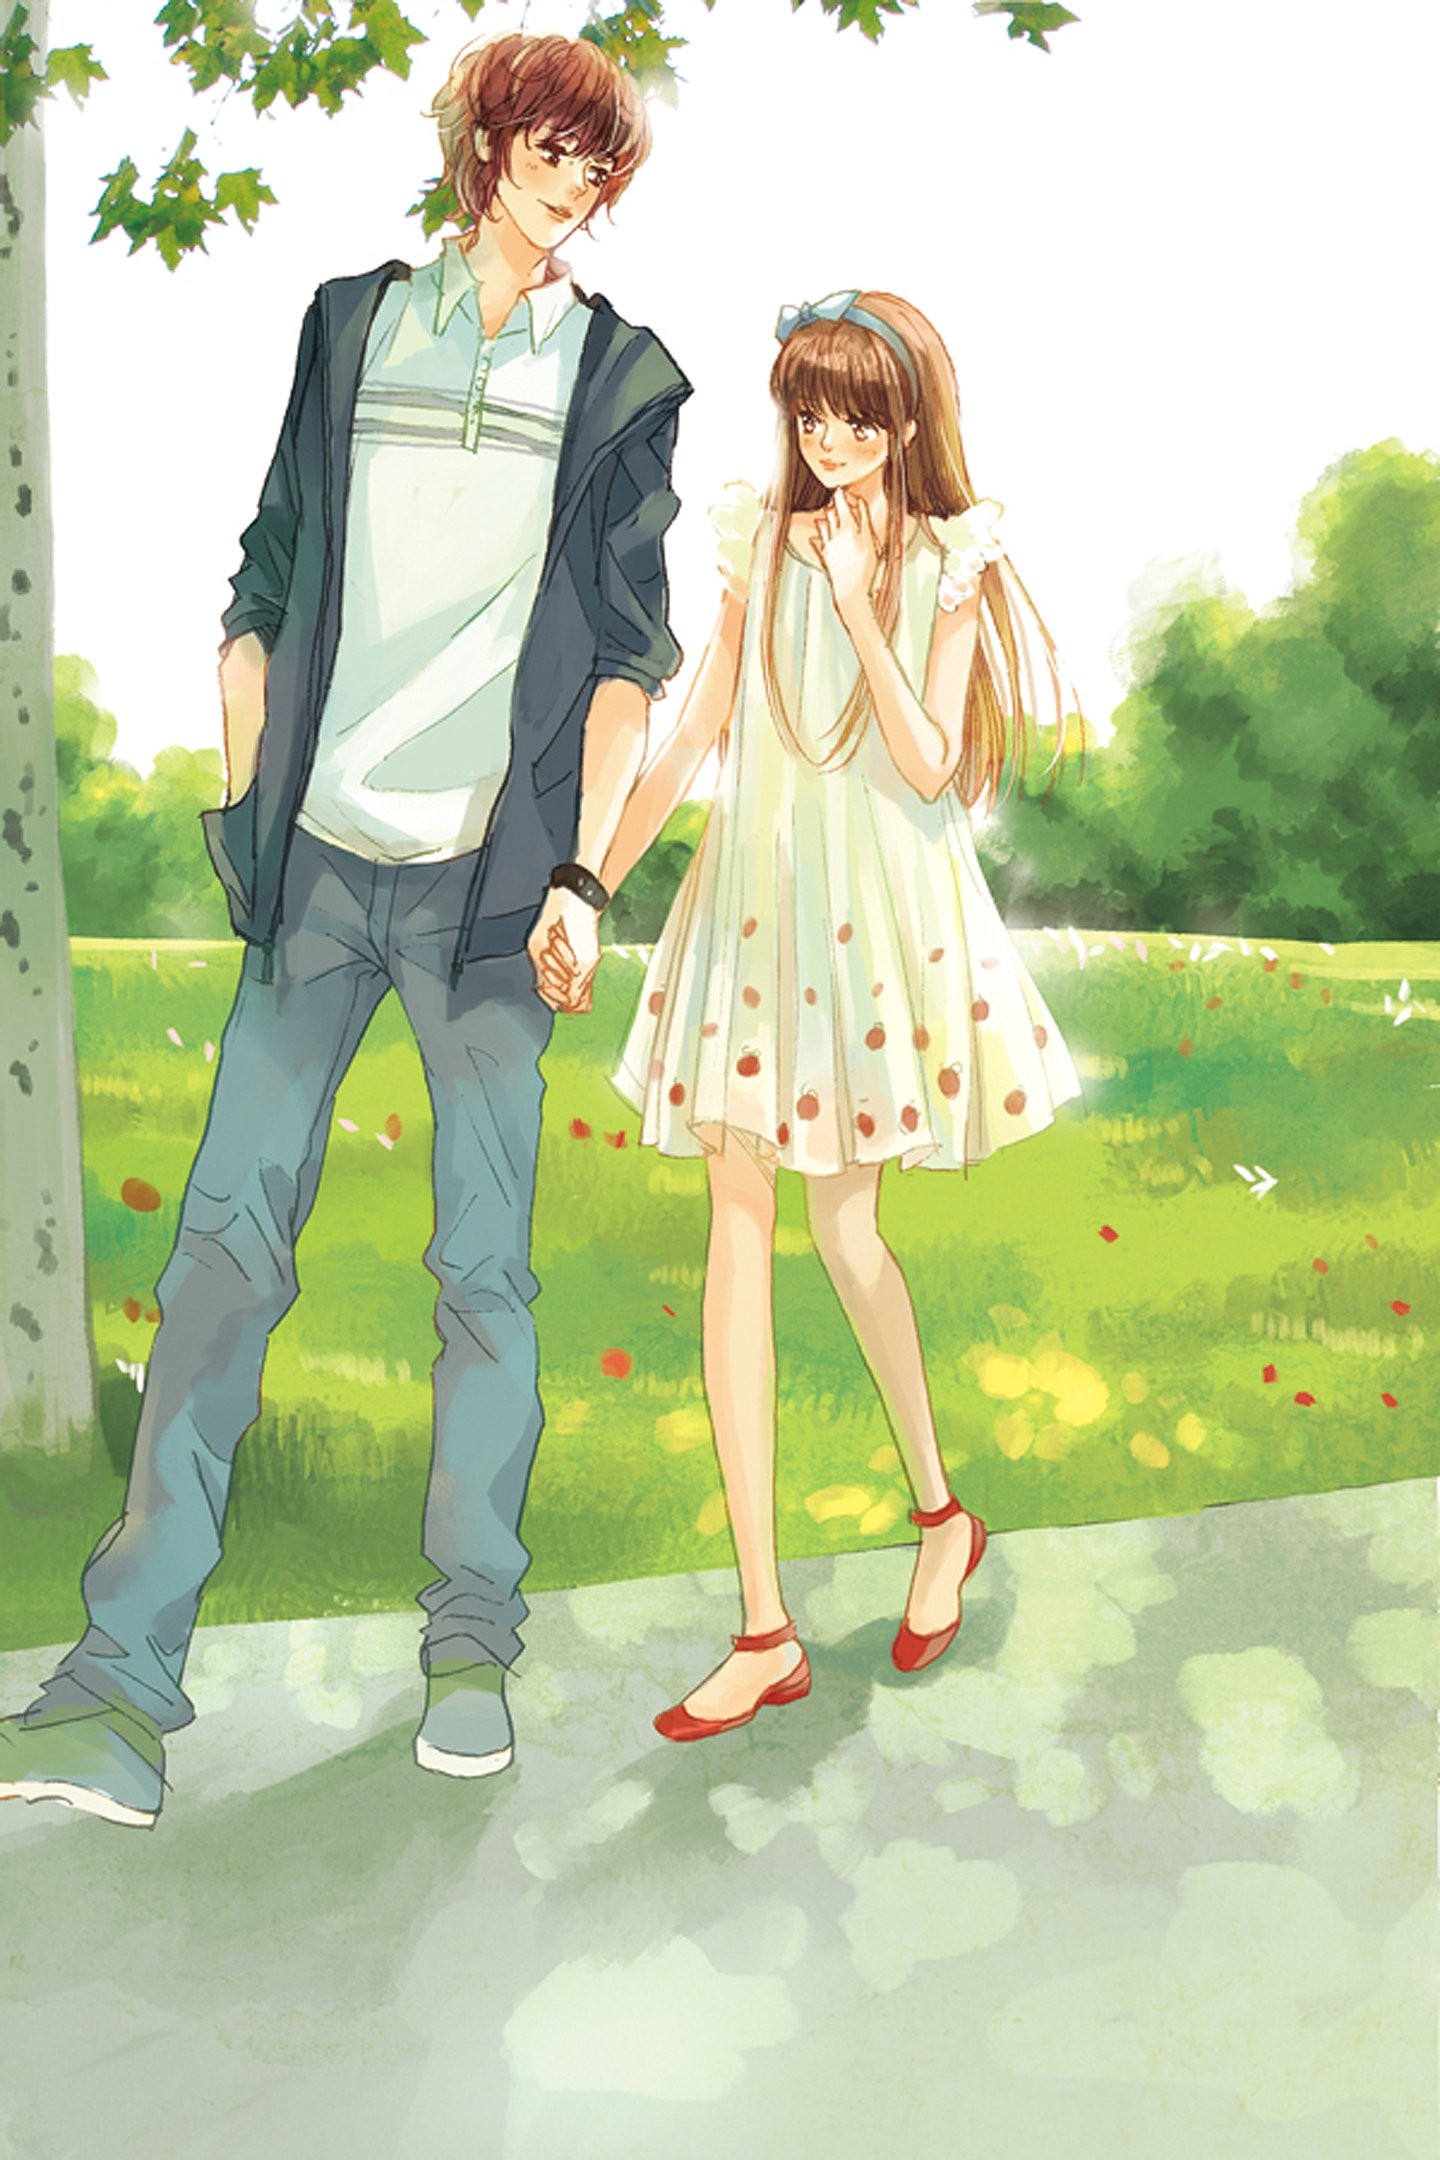 Wallpaper Anime Couple 76 Pictures